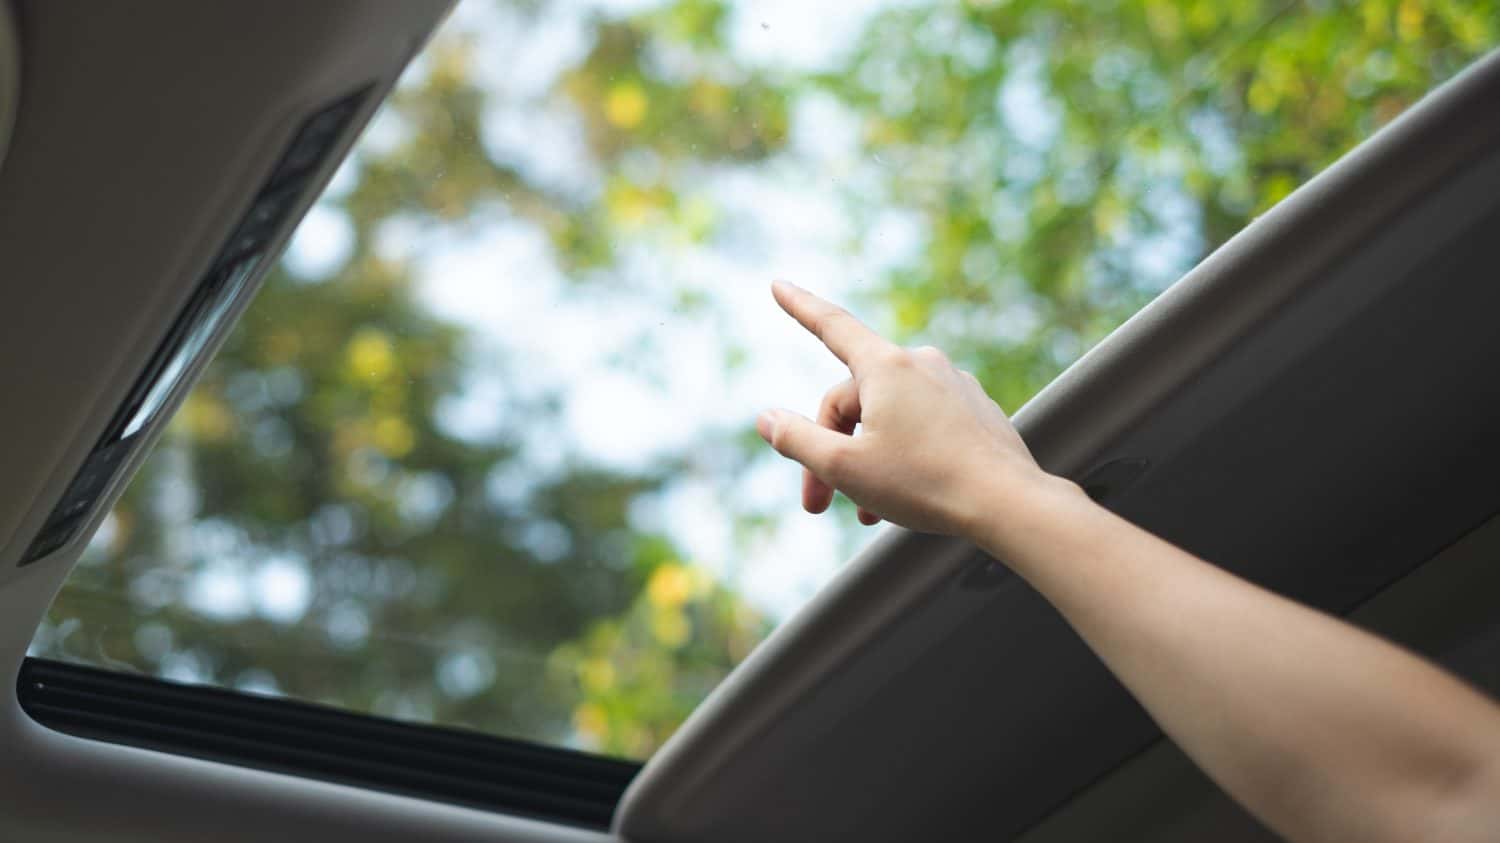 A hand pointing at the sky, nature view from Glass sunroof in the car. Concept of car interior, exploration road trip, modern family journey, vacation and leisure activity and beauty in nature.